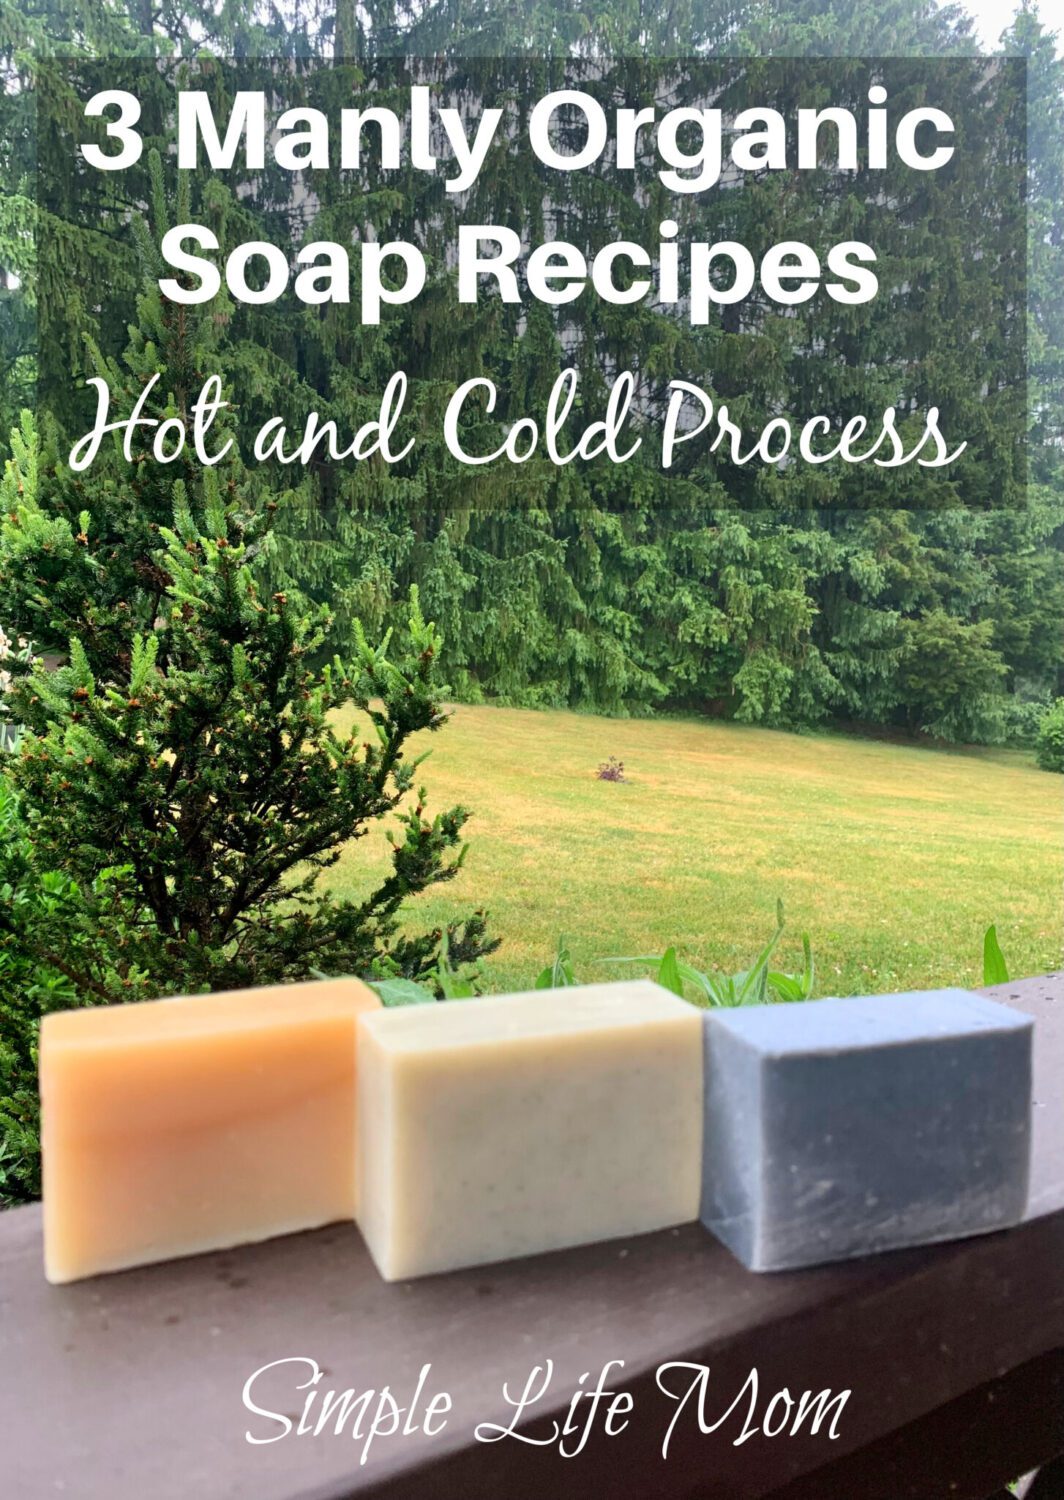 https://simplelifemom.com/wp-content/uploads/2023/06/3-Manly-Organic-Soap-Recipes-soap-for-men-with-cold-process-or-hot-process-soap-making-by-Simple-Life-Mom-scaled.jpg